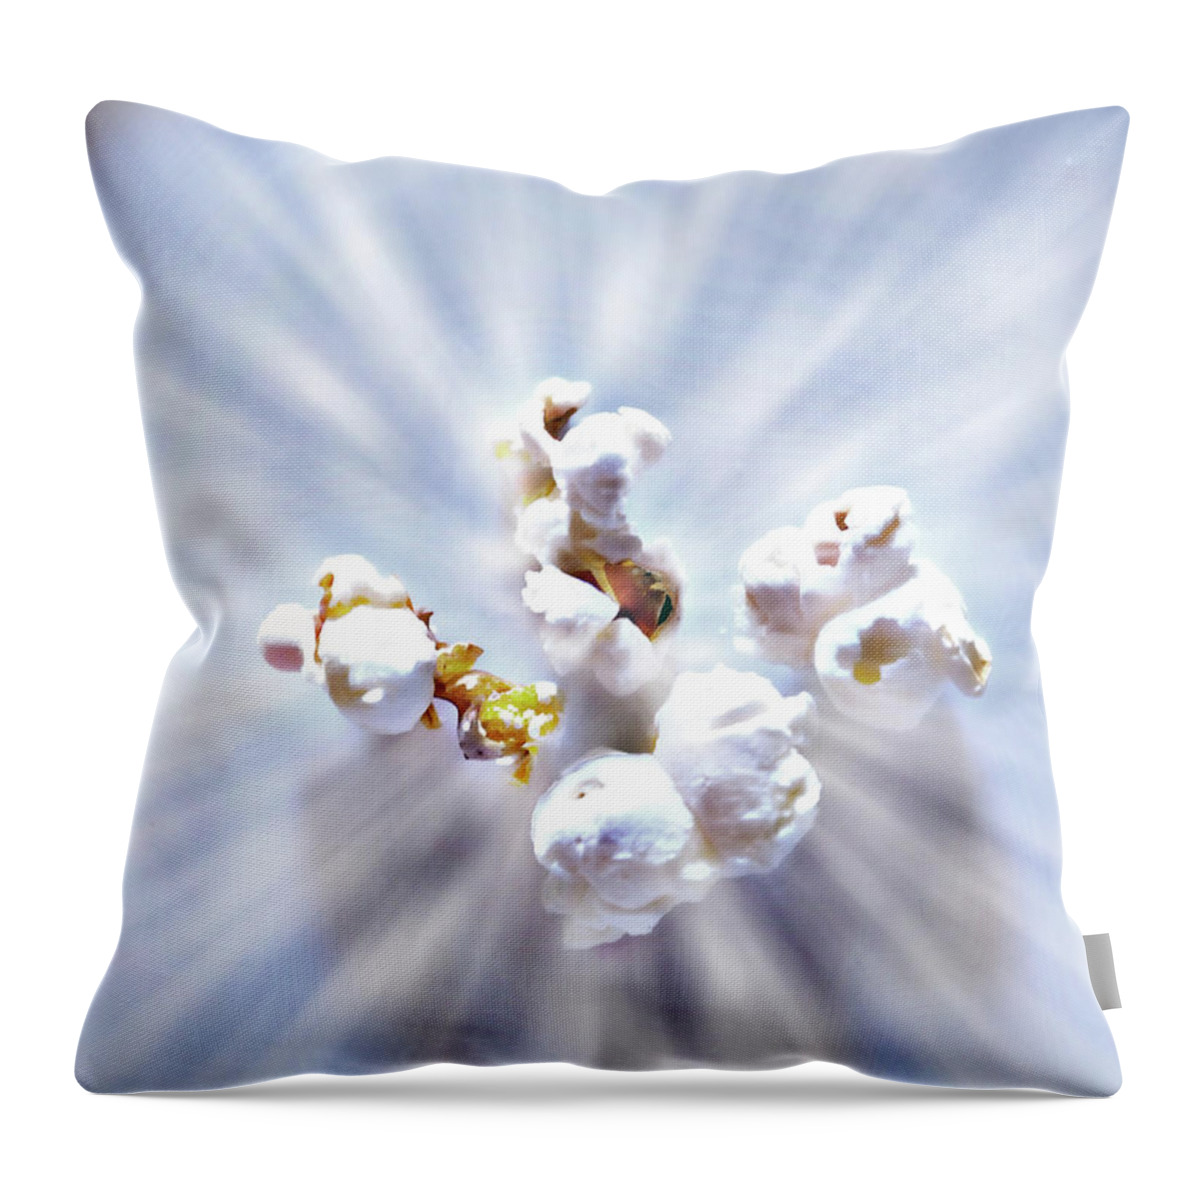 Popcorn Throw Pillow featuring the photograph Popcorn by Hugh Smith